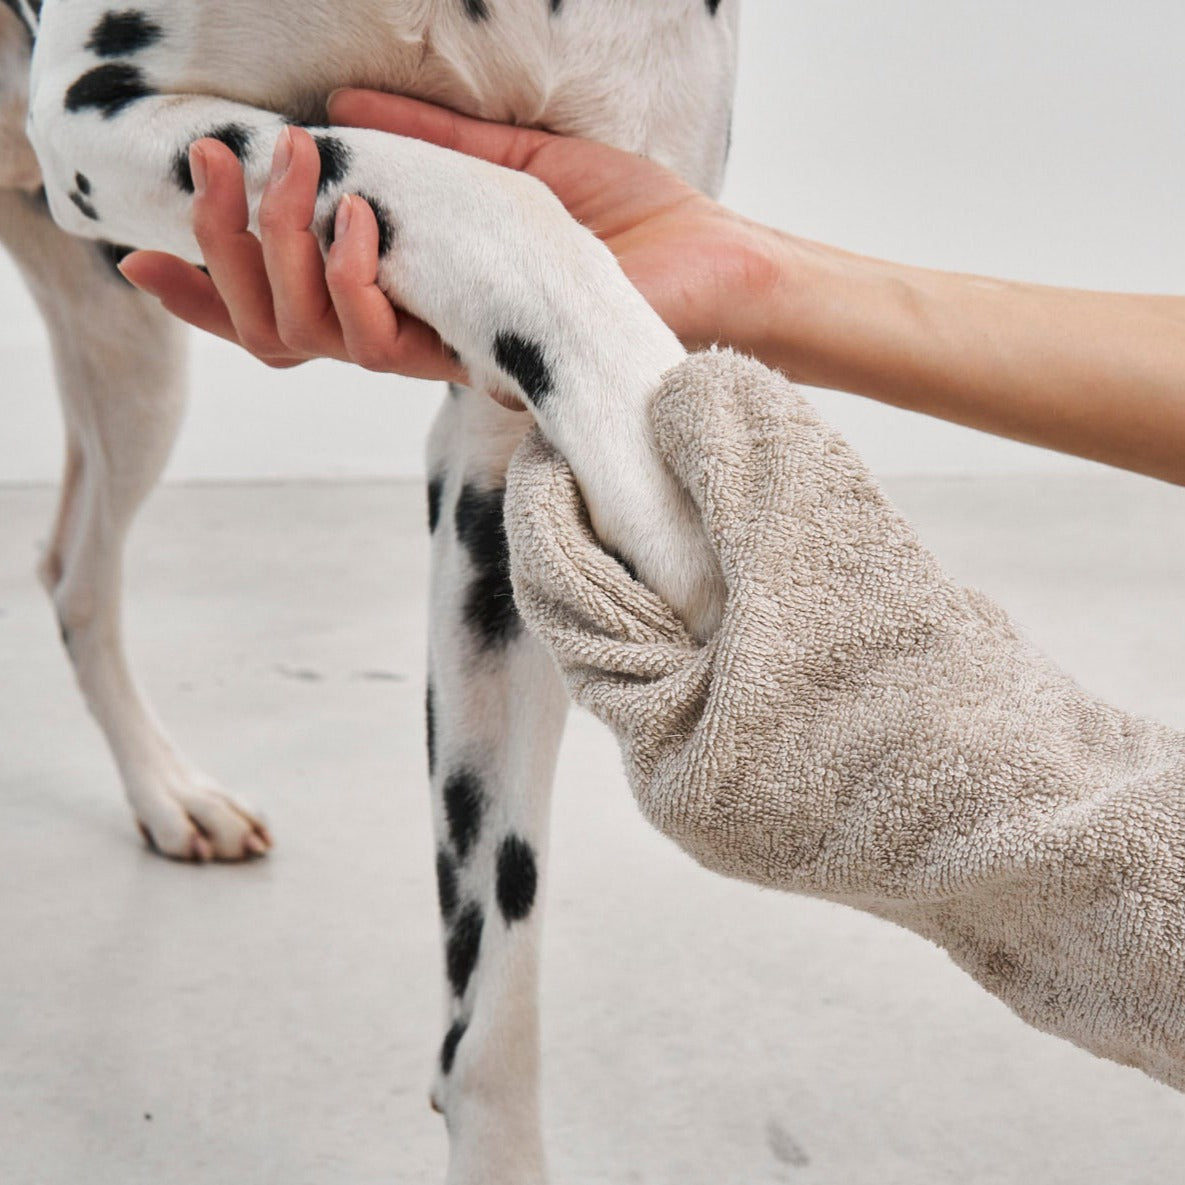 Dog drying glove in action - before and after